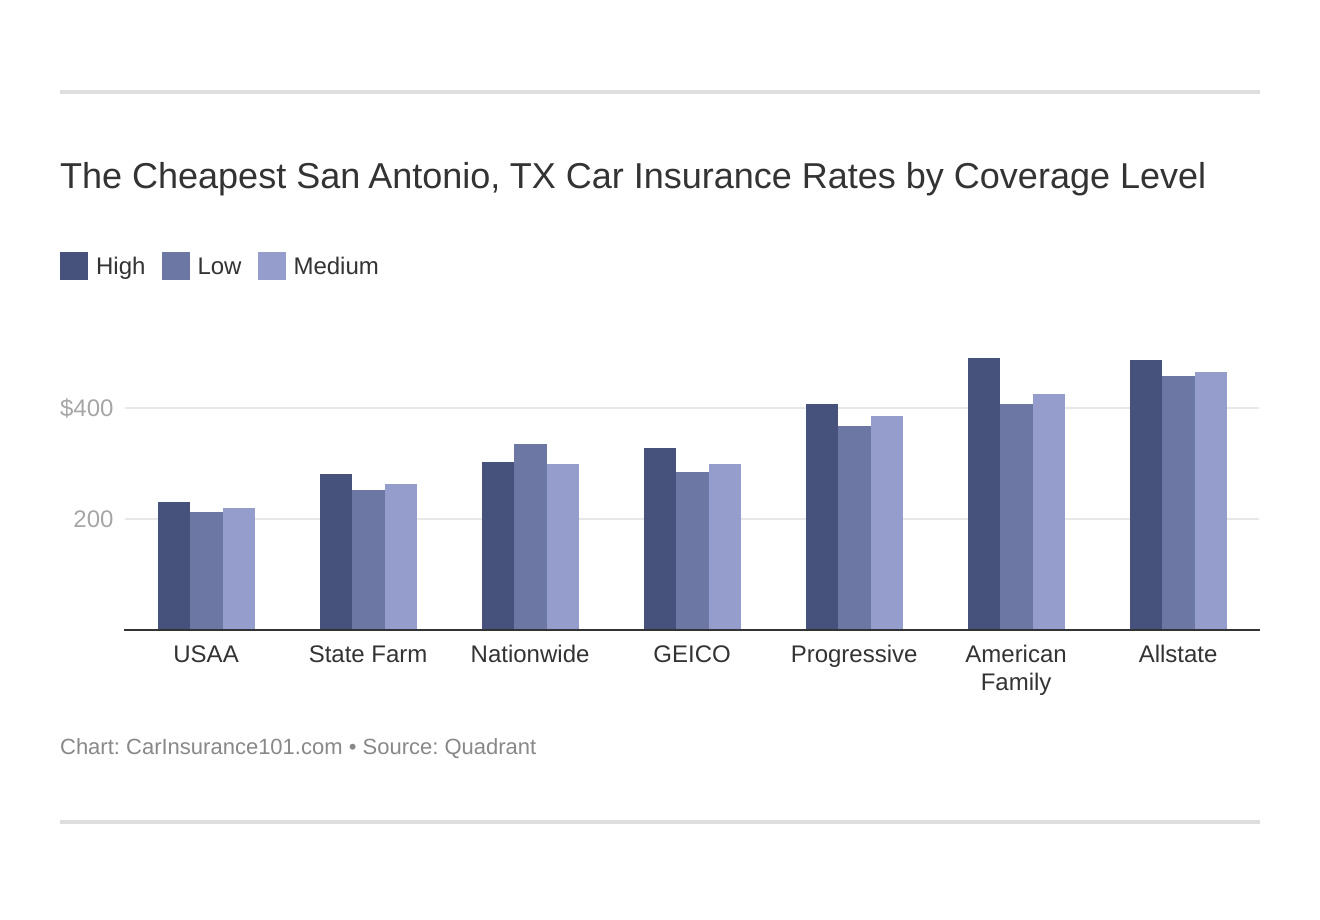 The Cheapest San Antonio, TX Car Insurance Rates by Coverage Level